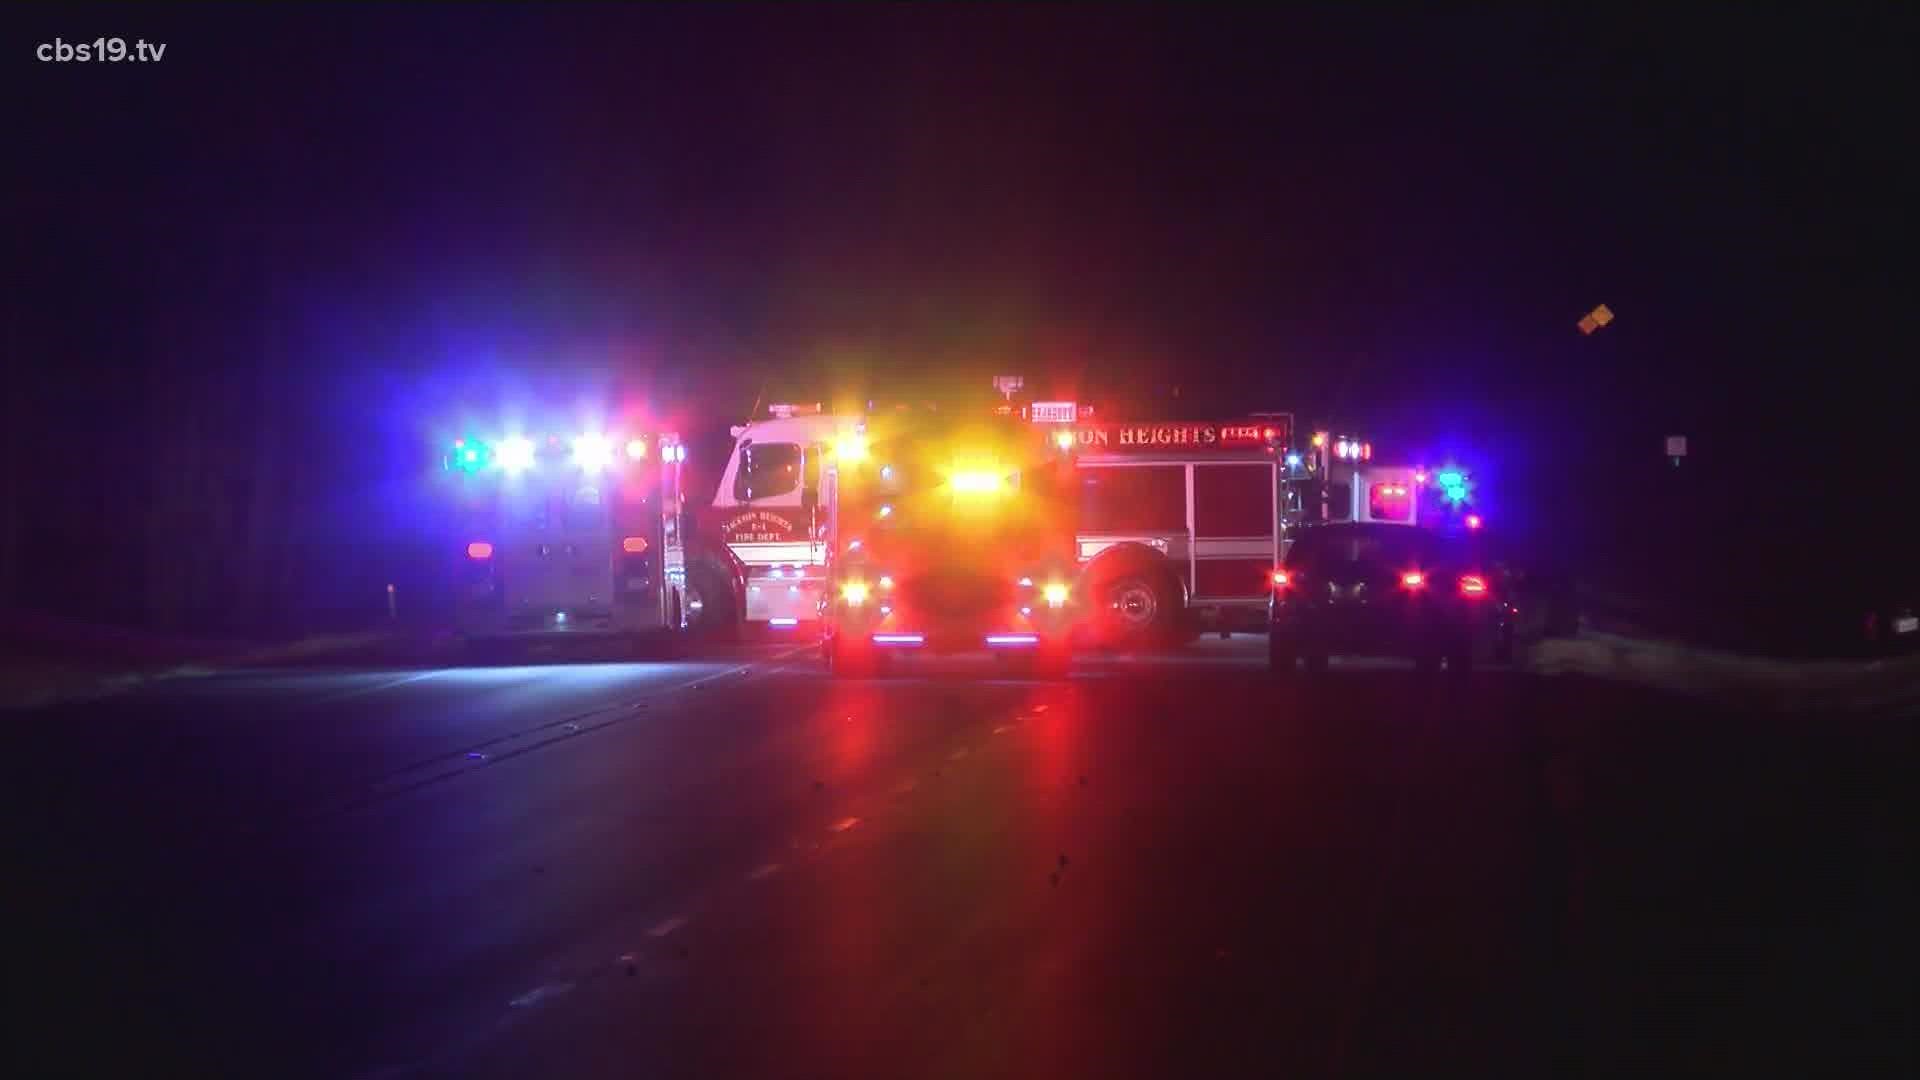 CBS19 reporters saw a helicopter leaving the scent, along with at least three ambulances.